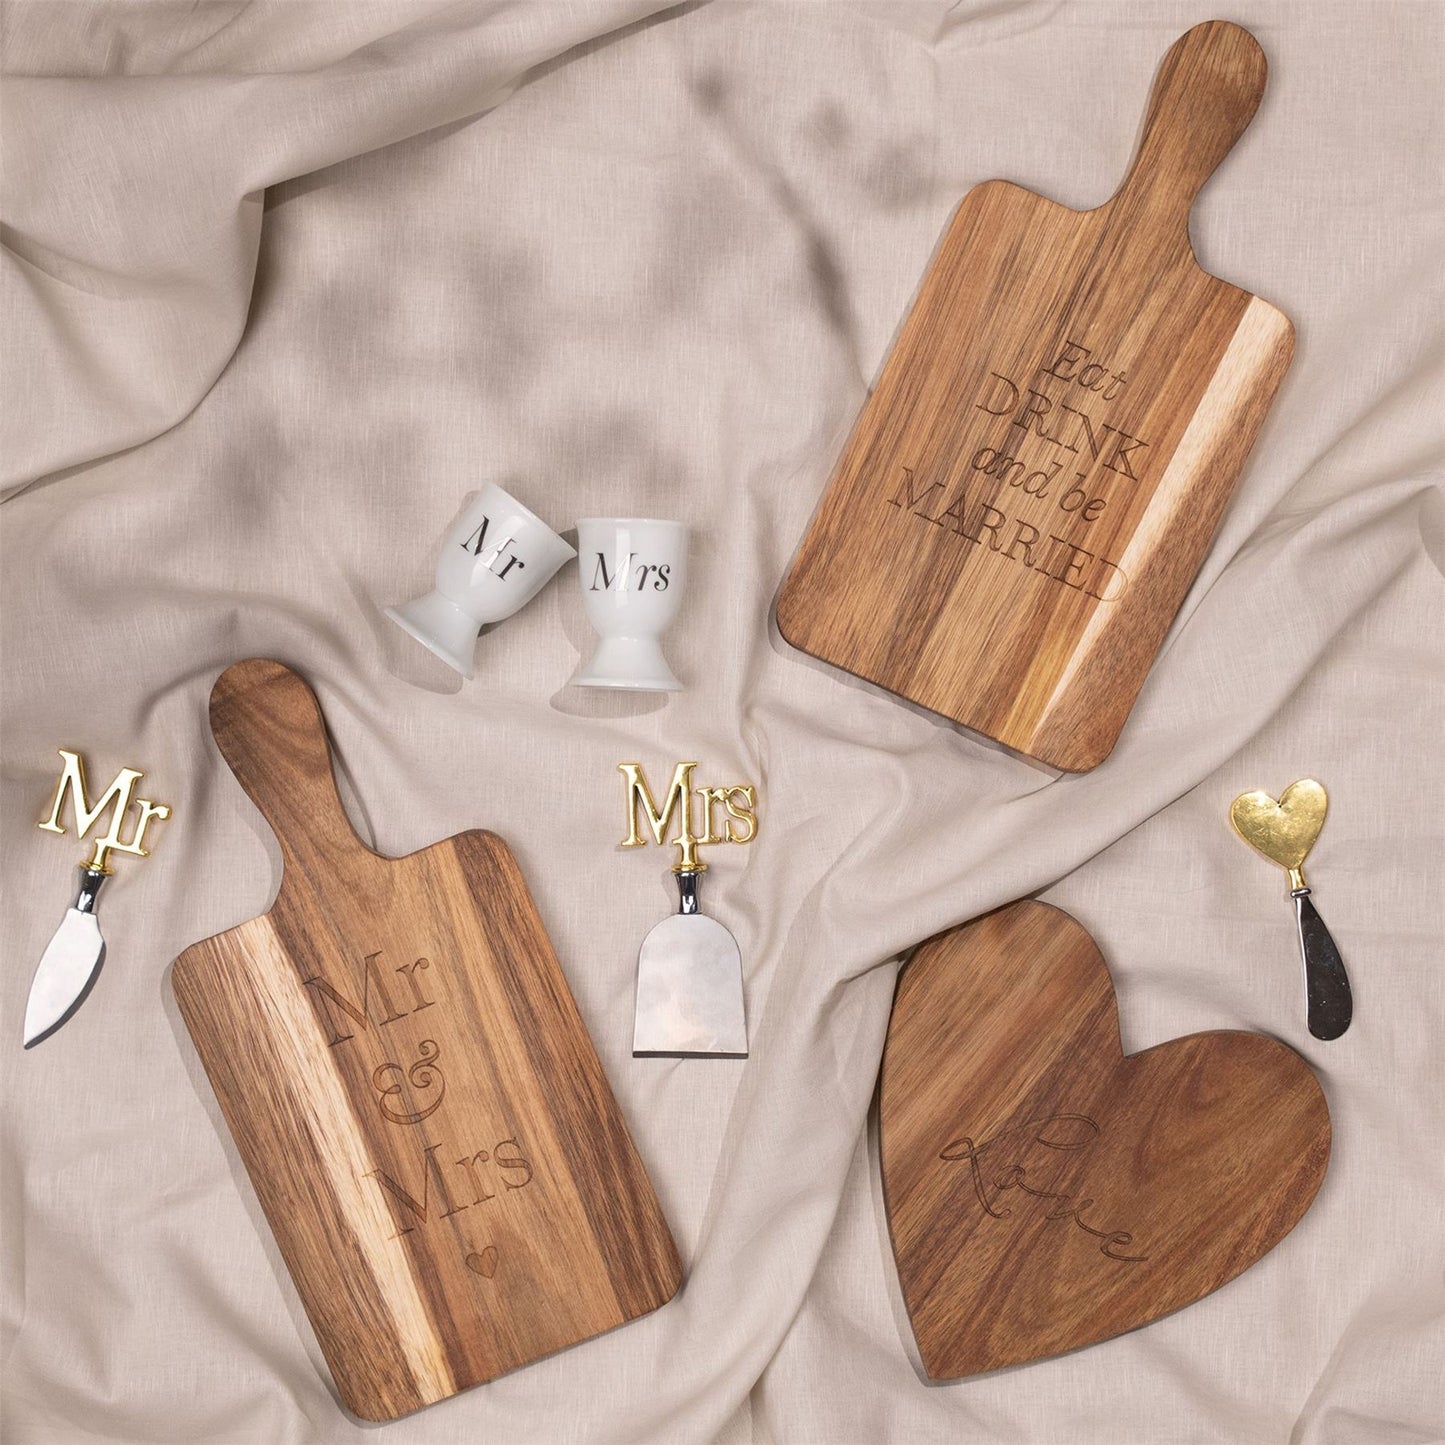 Amore Heart Shaped Wooden Cheeseboard & Knife "Love"